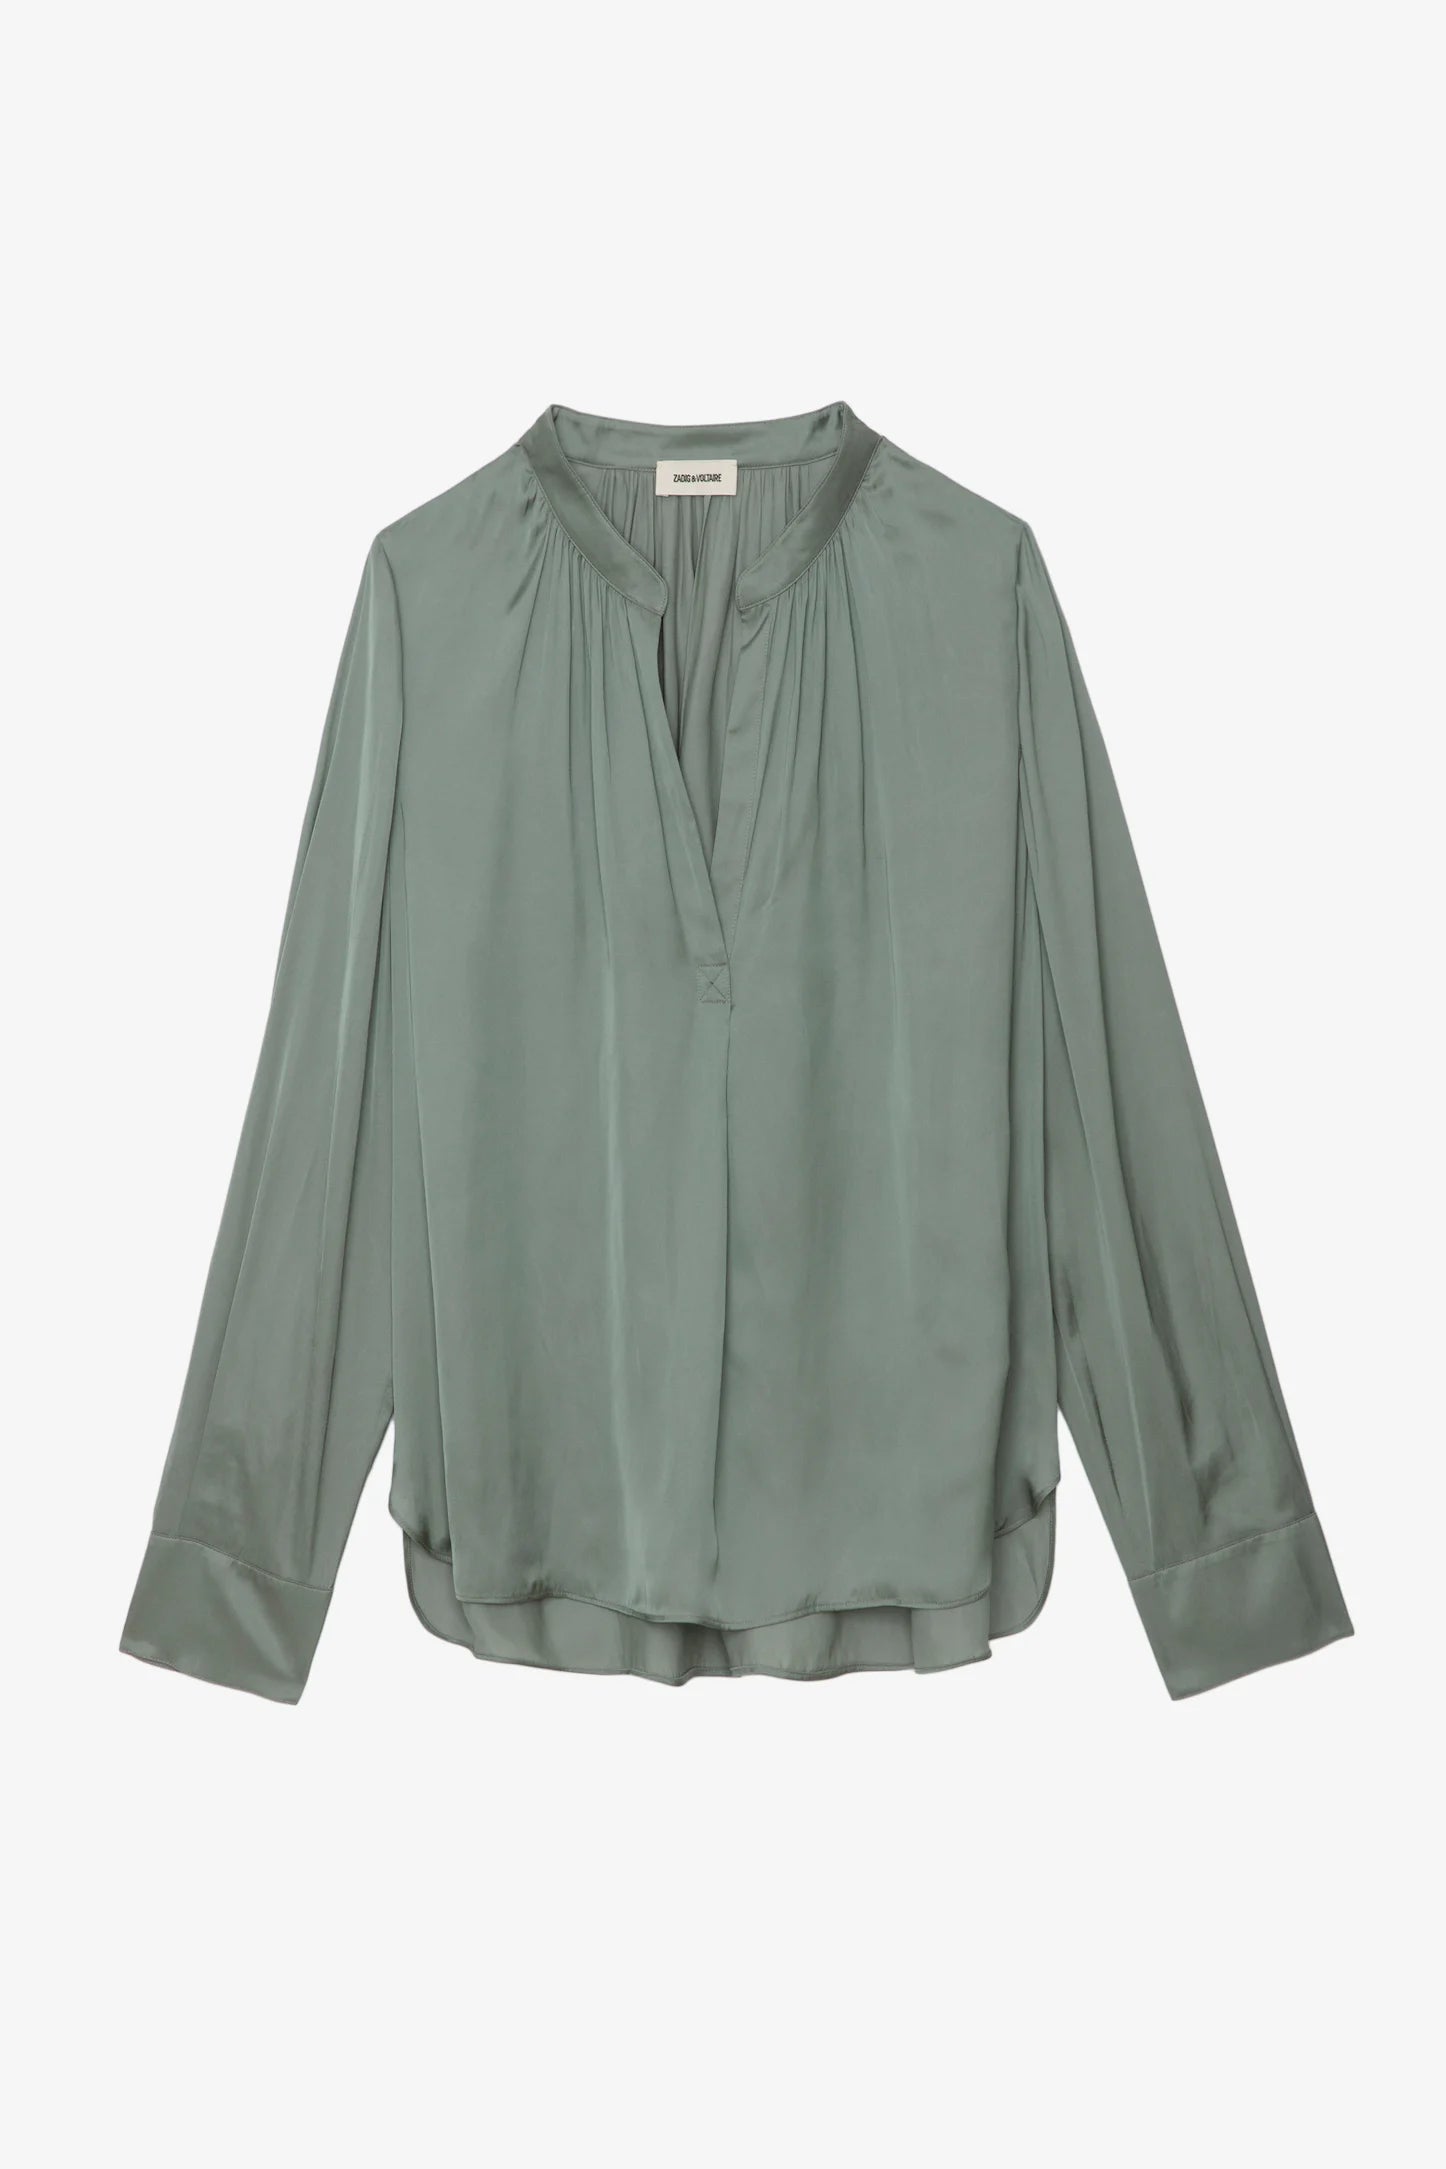 Zadig & Voltaire Blouse Tink Satin